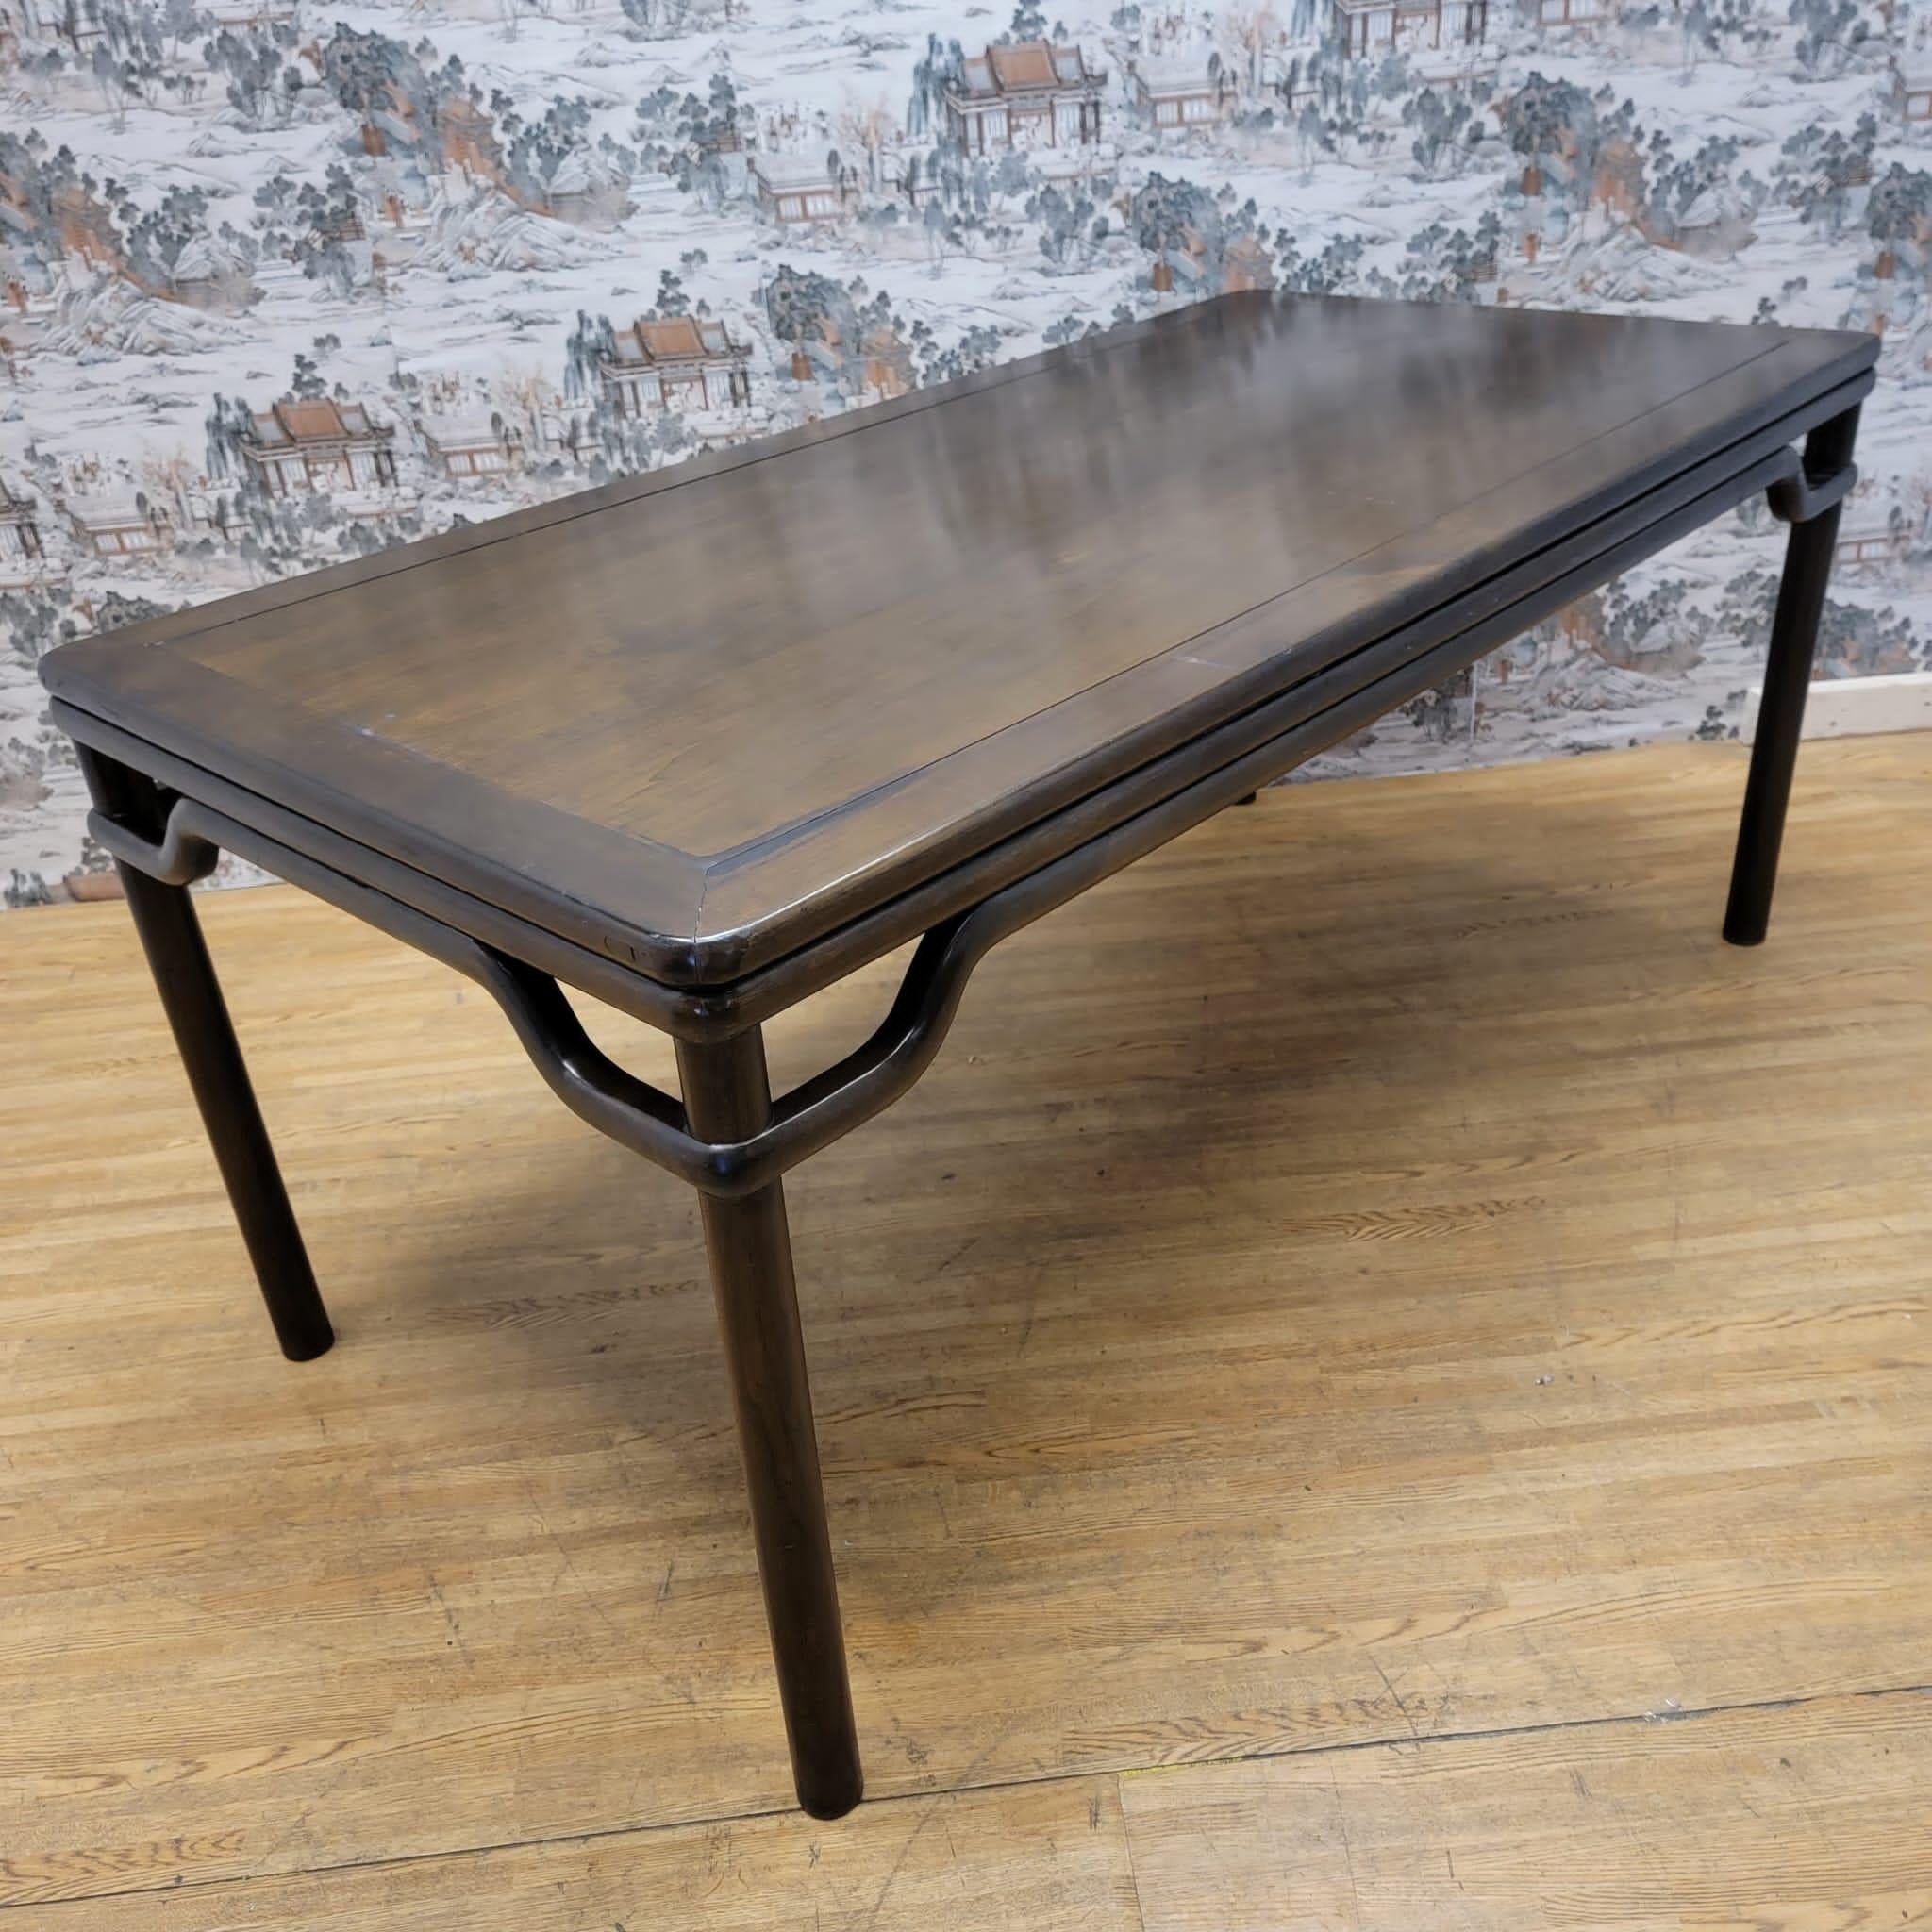 Antique Chinese elm altar table with original color and patina.

This is an antique Chinese elm wood alter table with original color and patina. Can be used as a dining table, or a desk. 

Circa: 1950

Dimensions:

W 71”
H 31”
D 35”